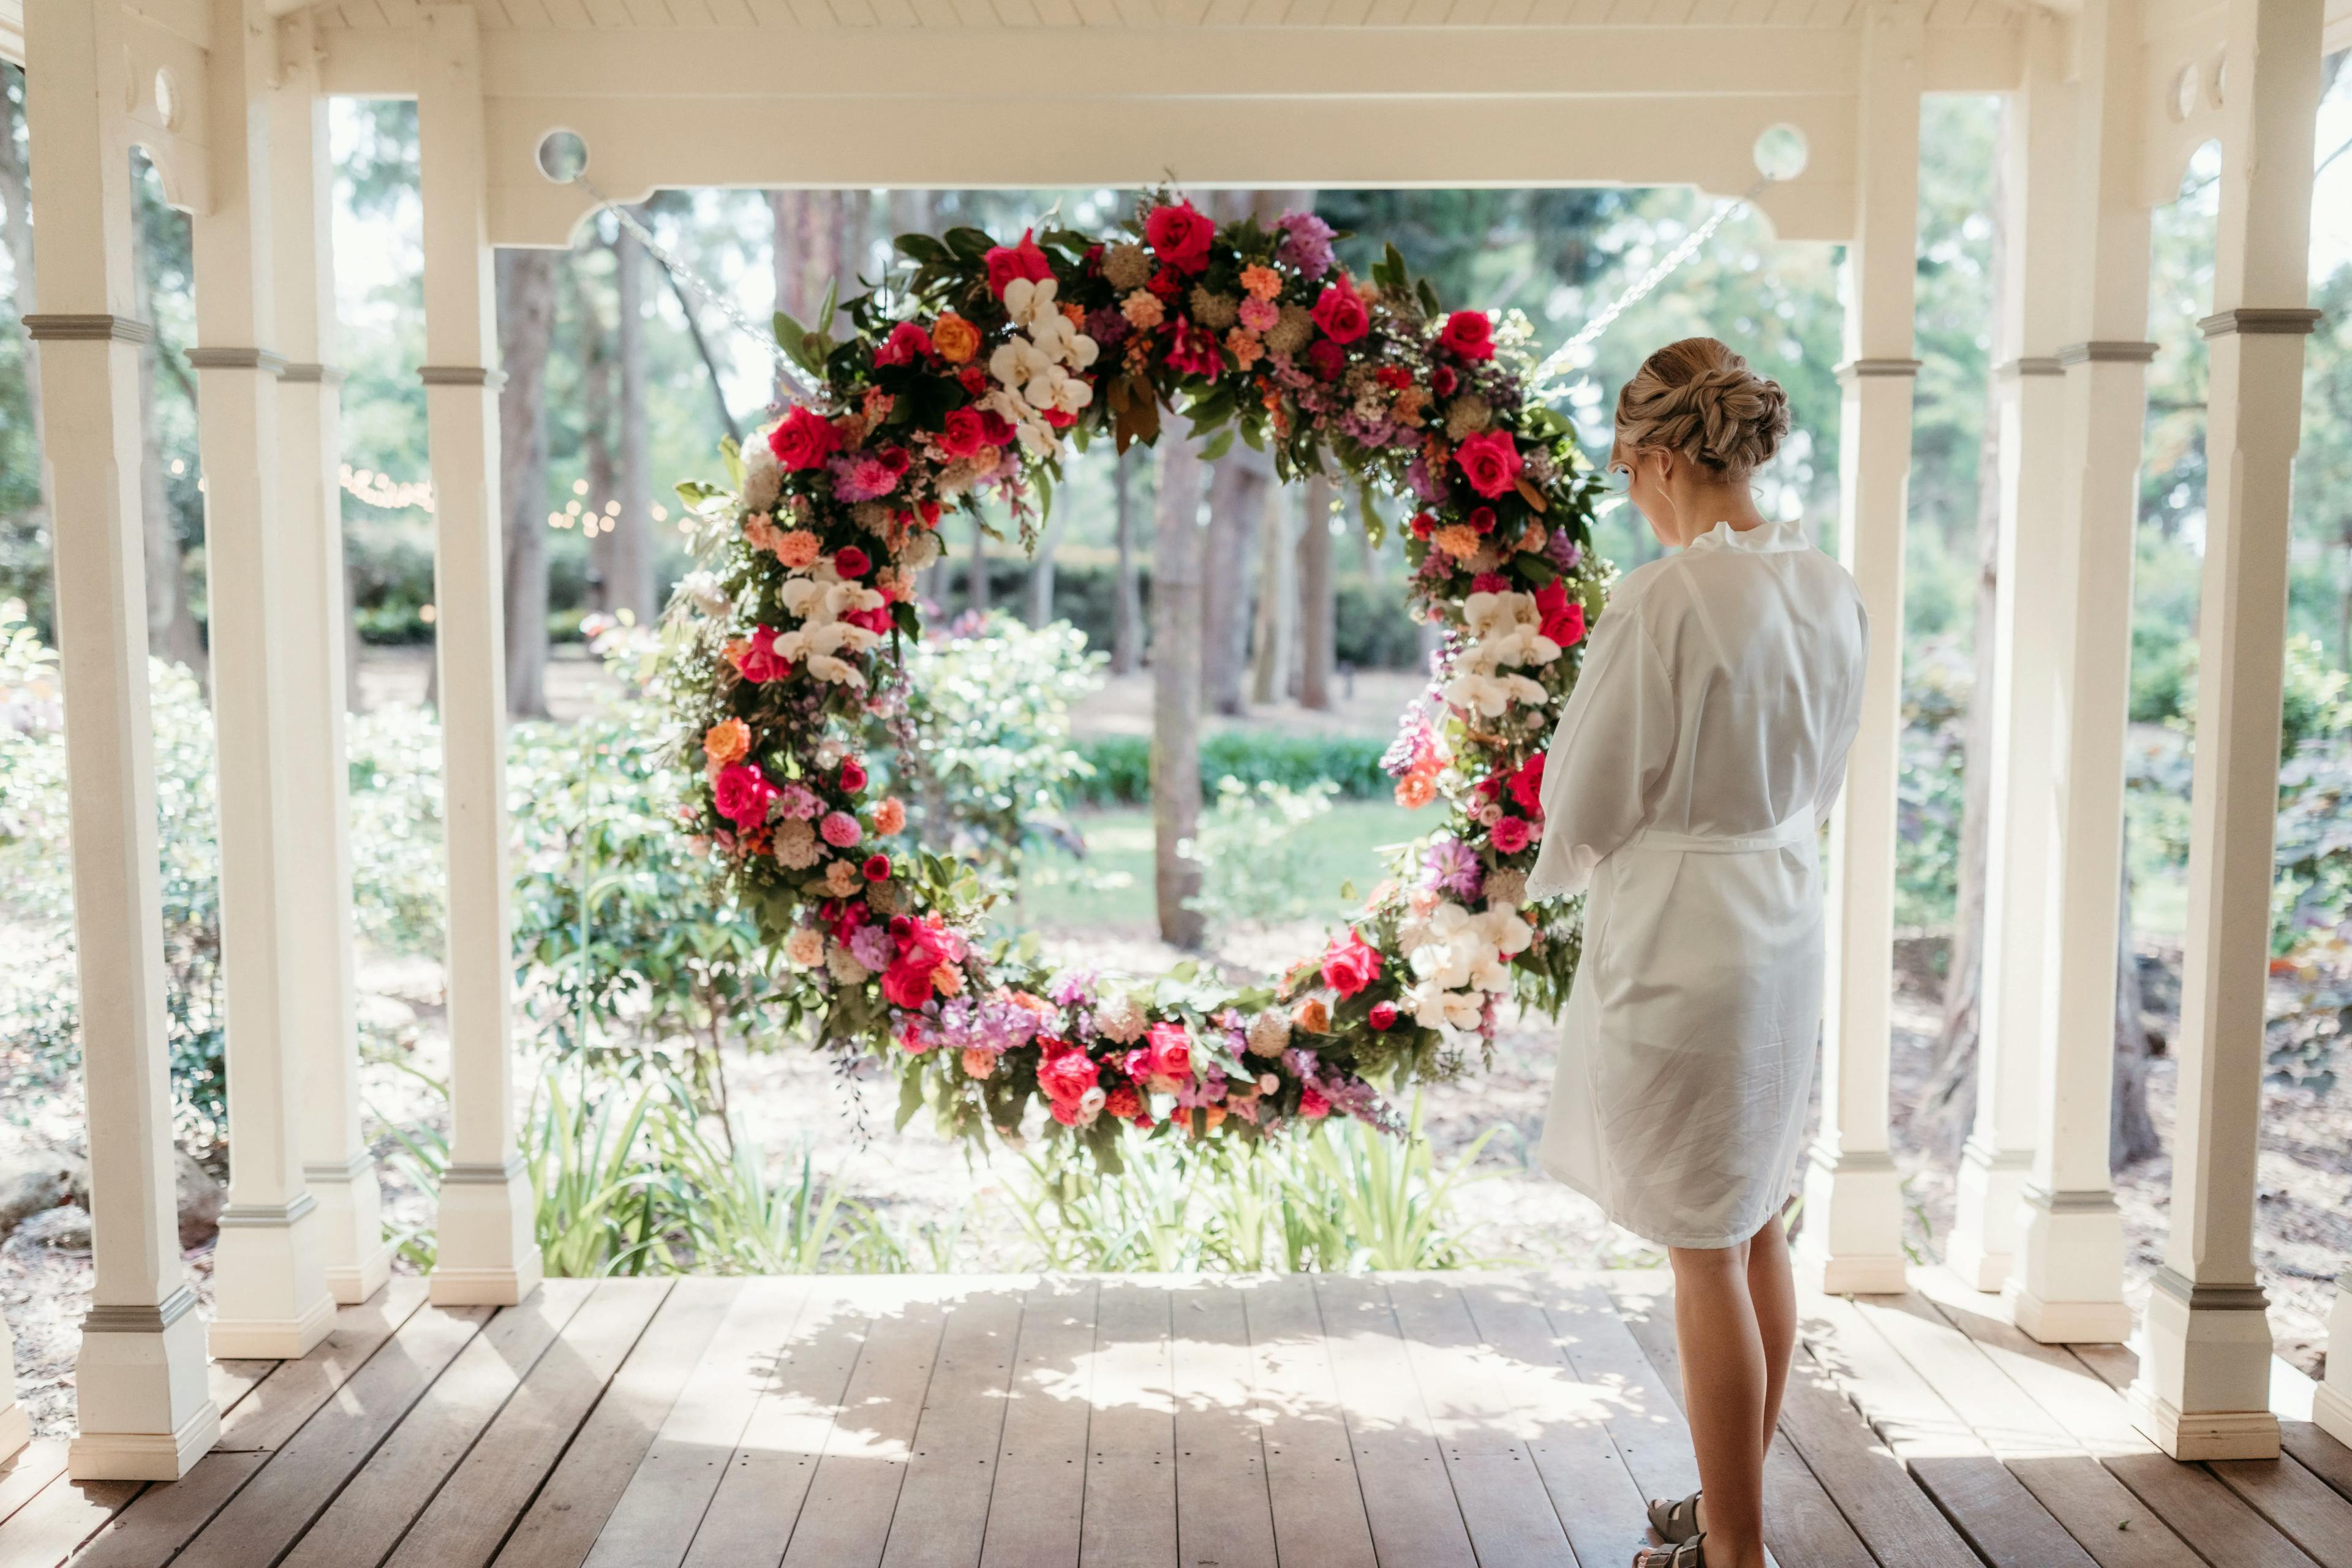 A woman in a white robe stands on a wooden veranda, looking at a large circular floral arrangement hanging in the center. The arrangement features a variety of colorful flowers, including pink, red, and white, with greenery. A garden is visible in the background.